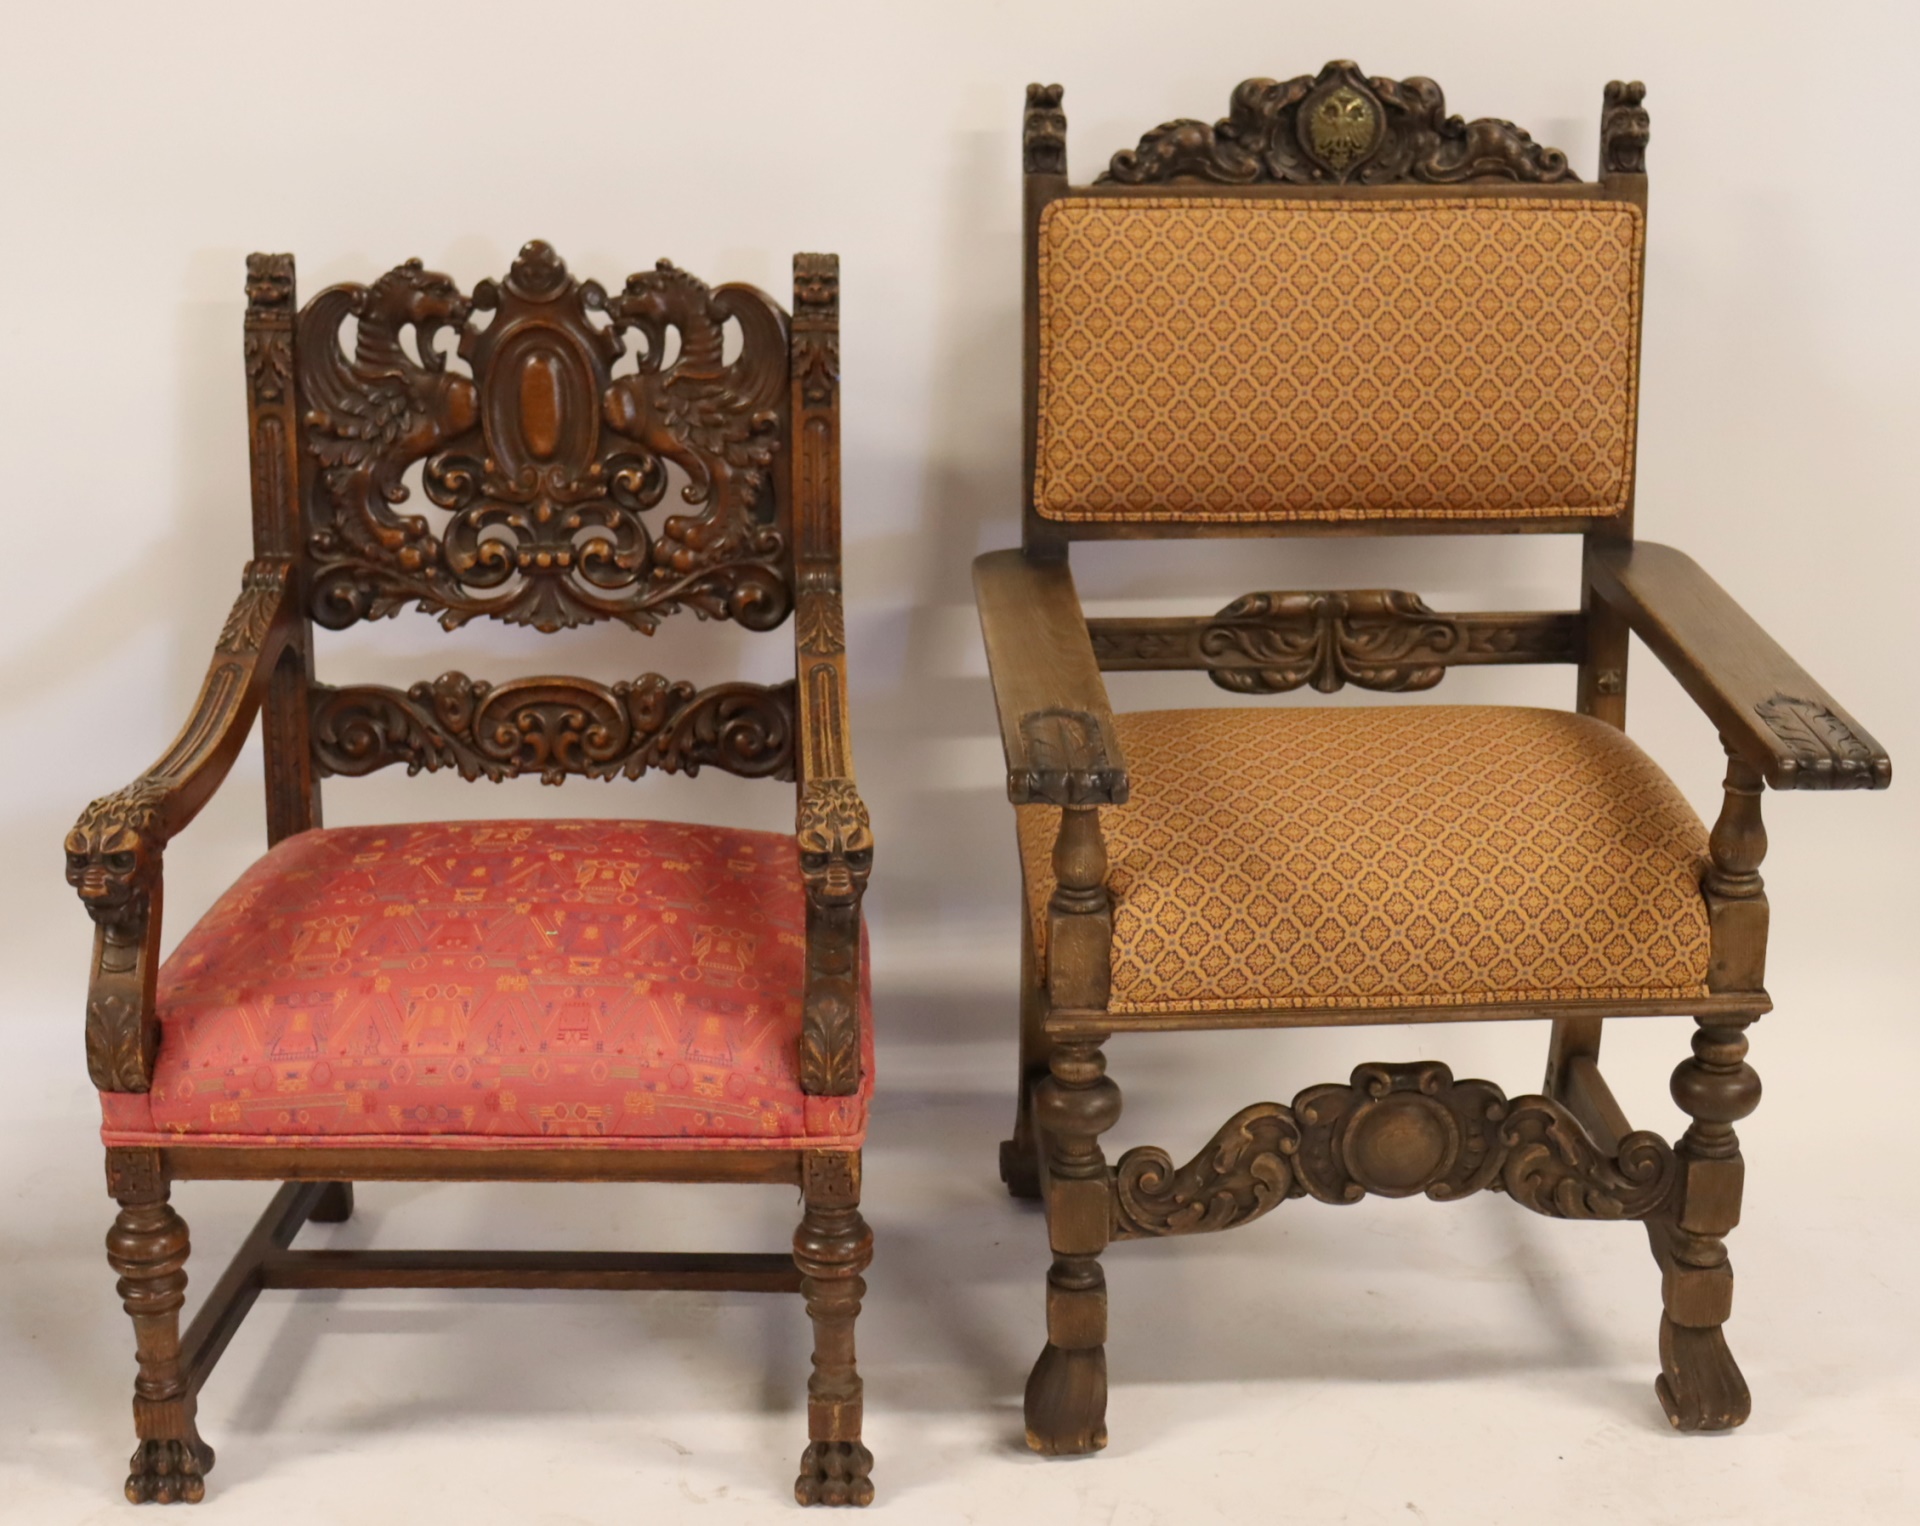 2 ANTIQUE CARVED CHAIRS INCL A 3b7c44